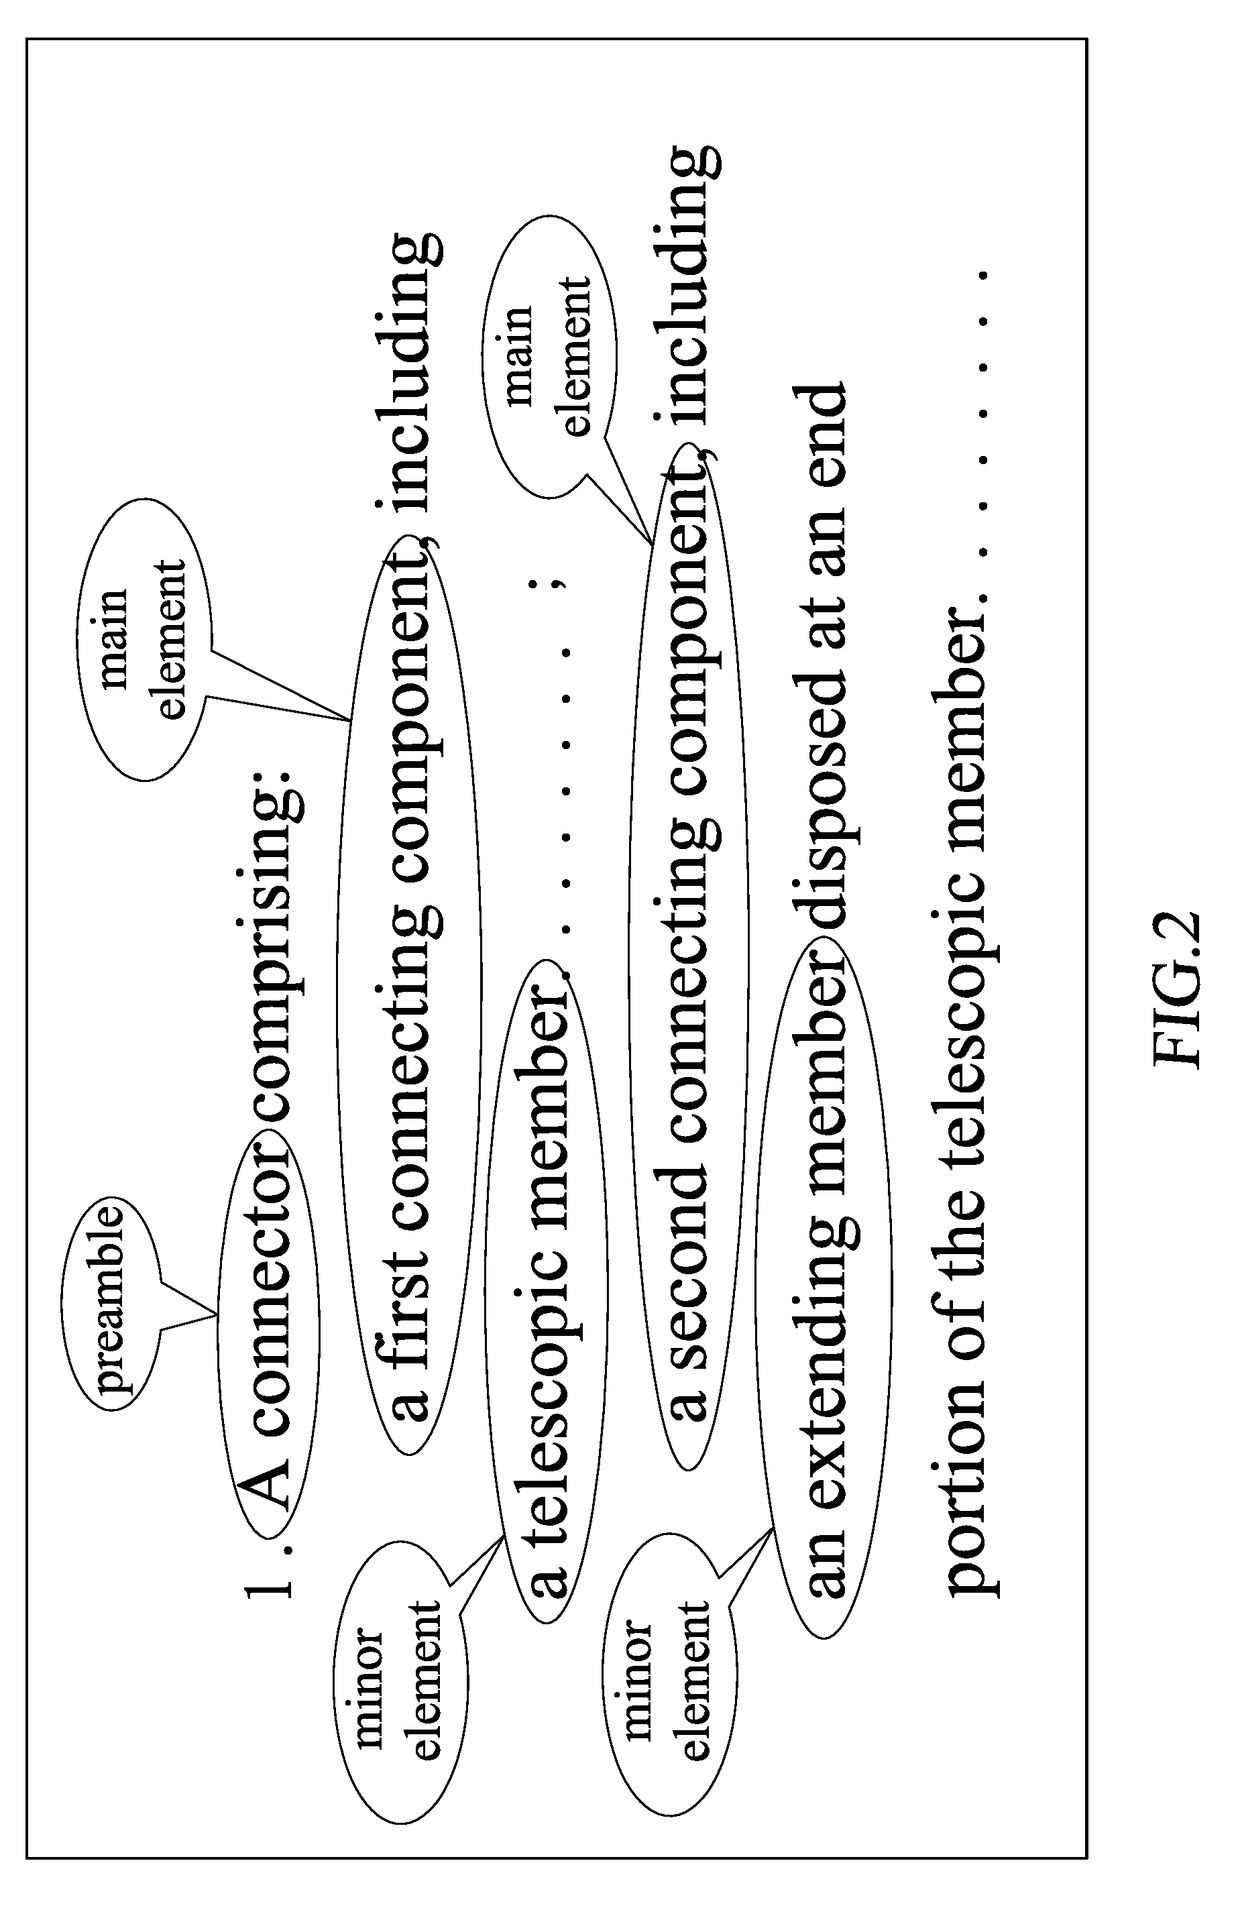 Patent claims disassembling and analyzing method